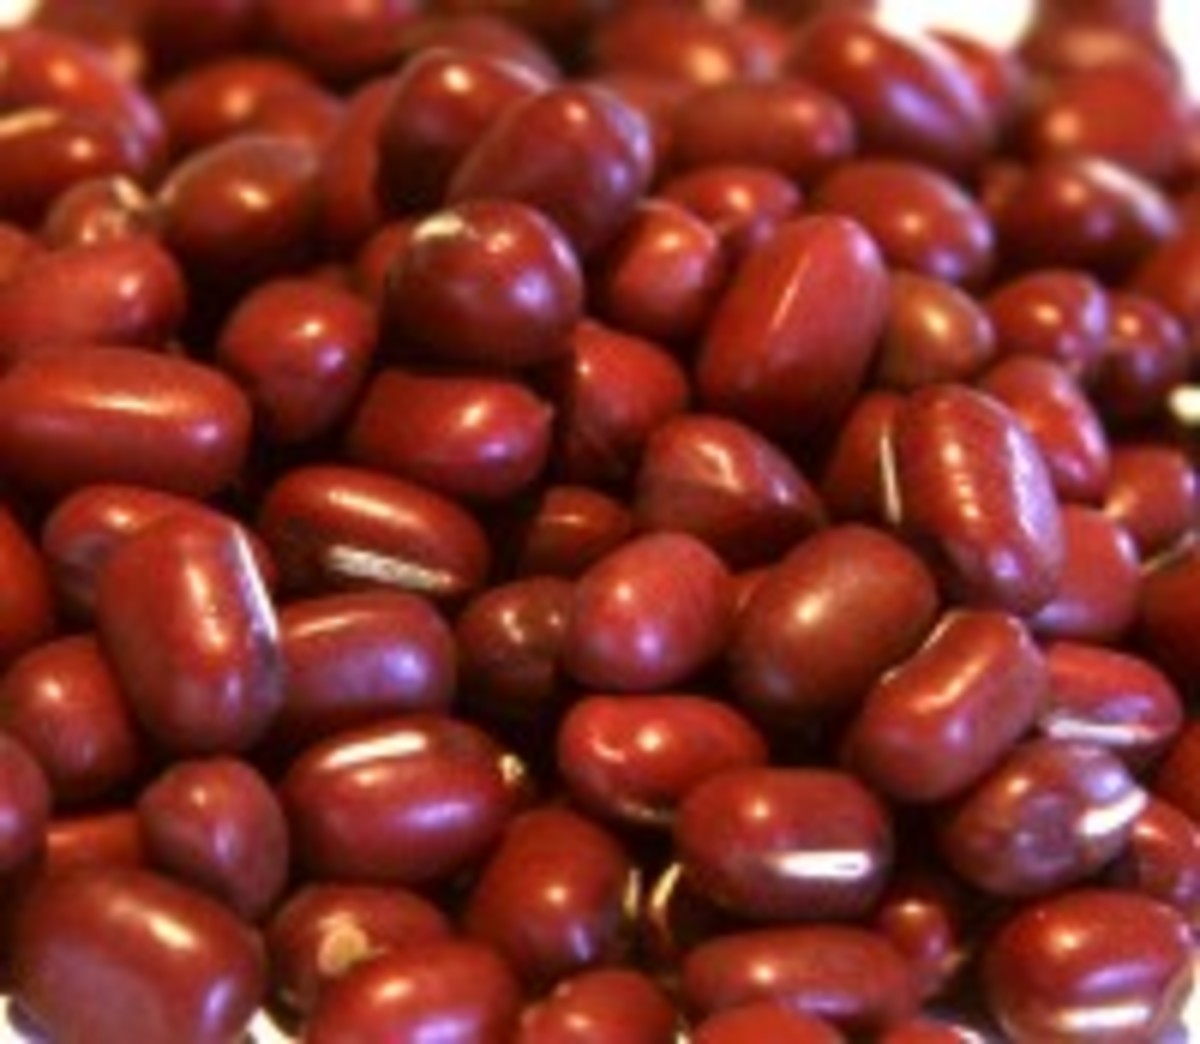 azuki or red beans